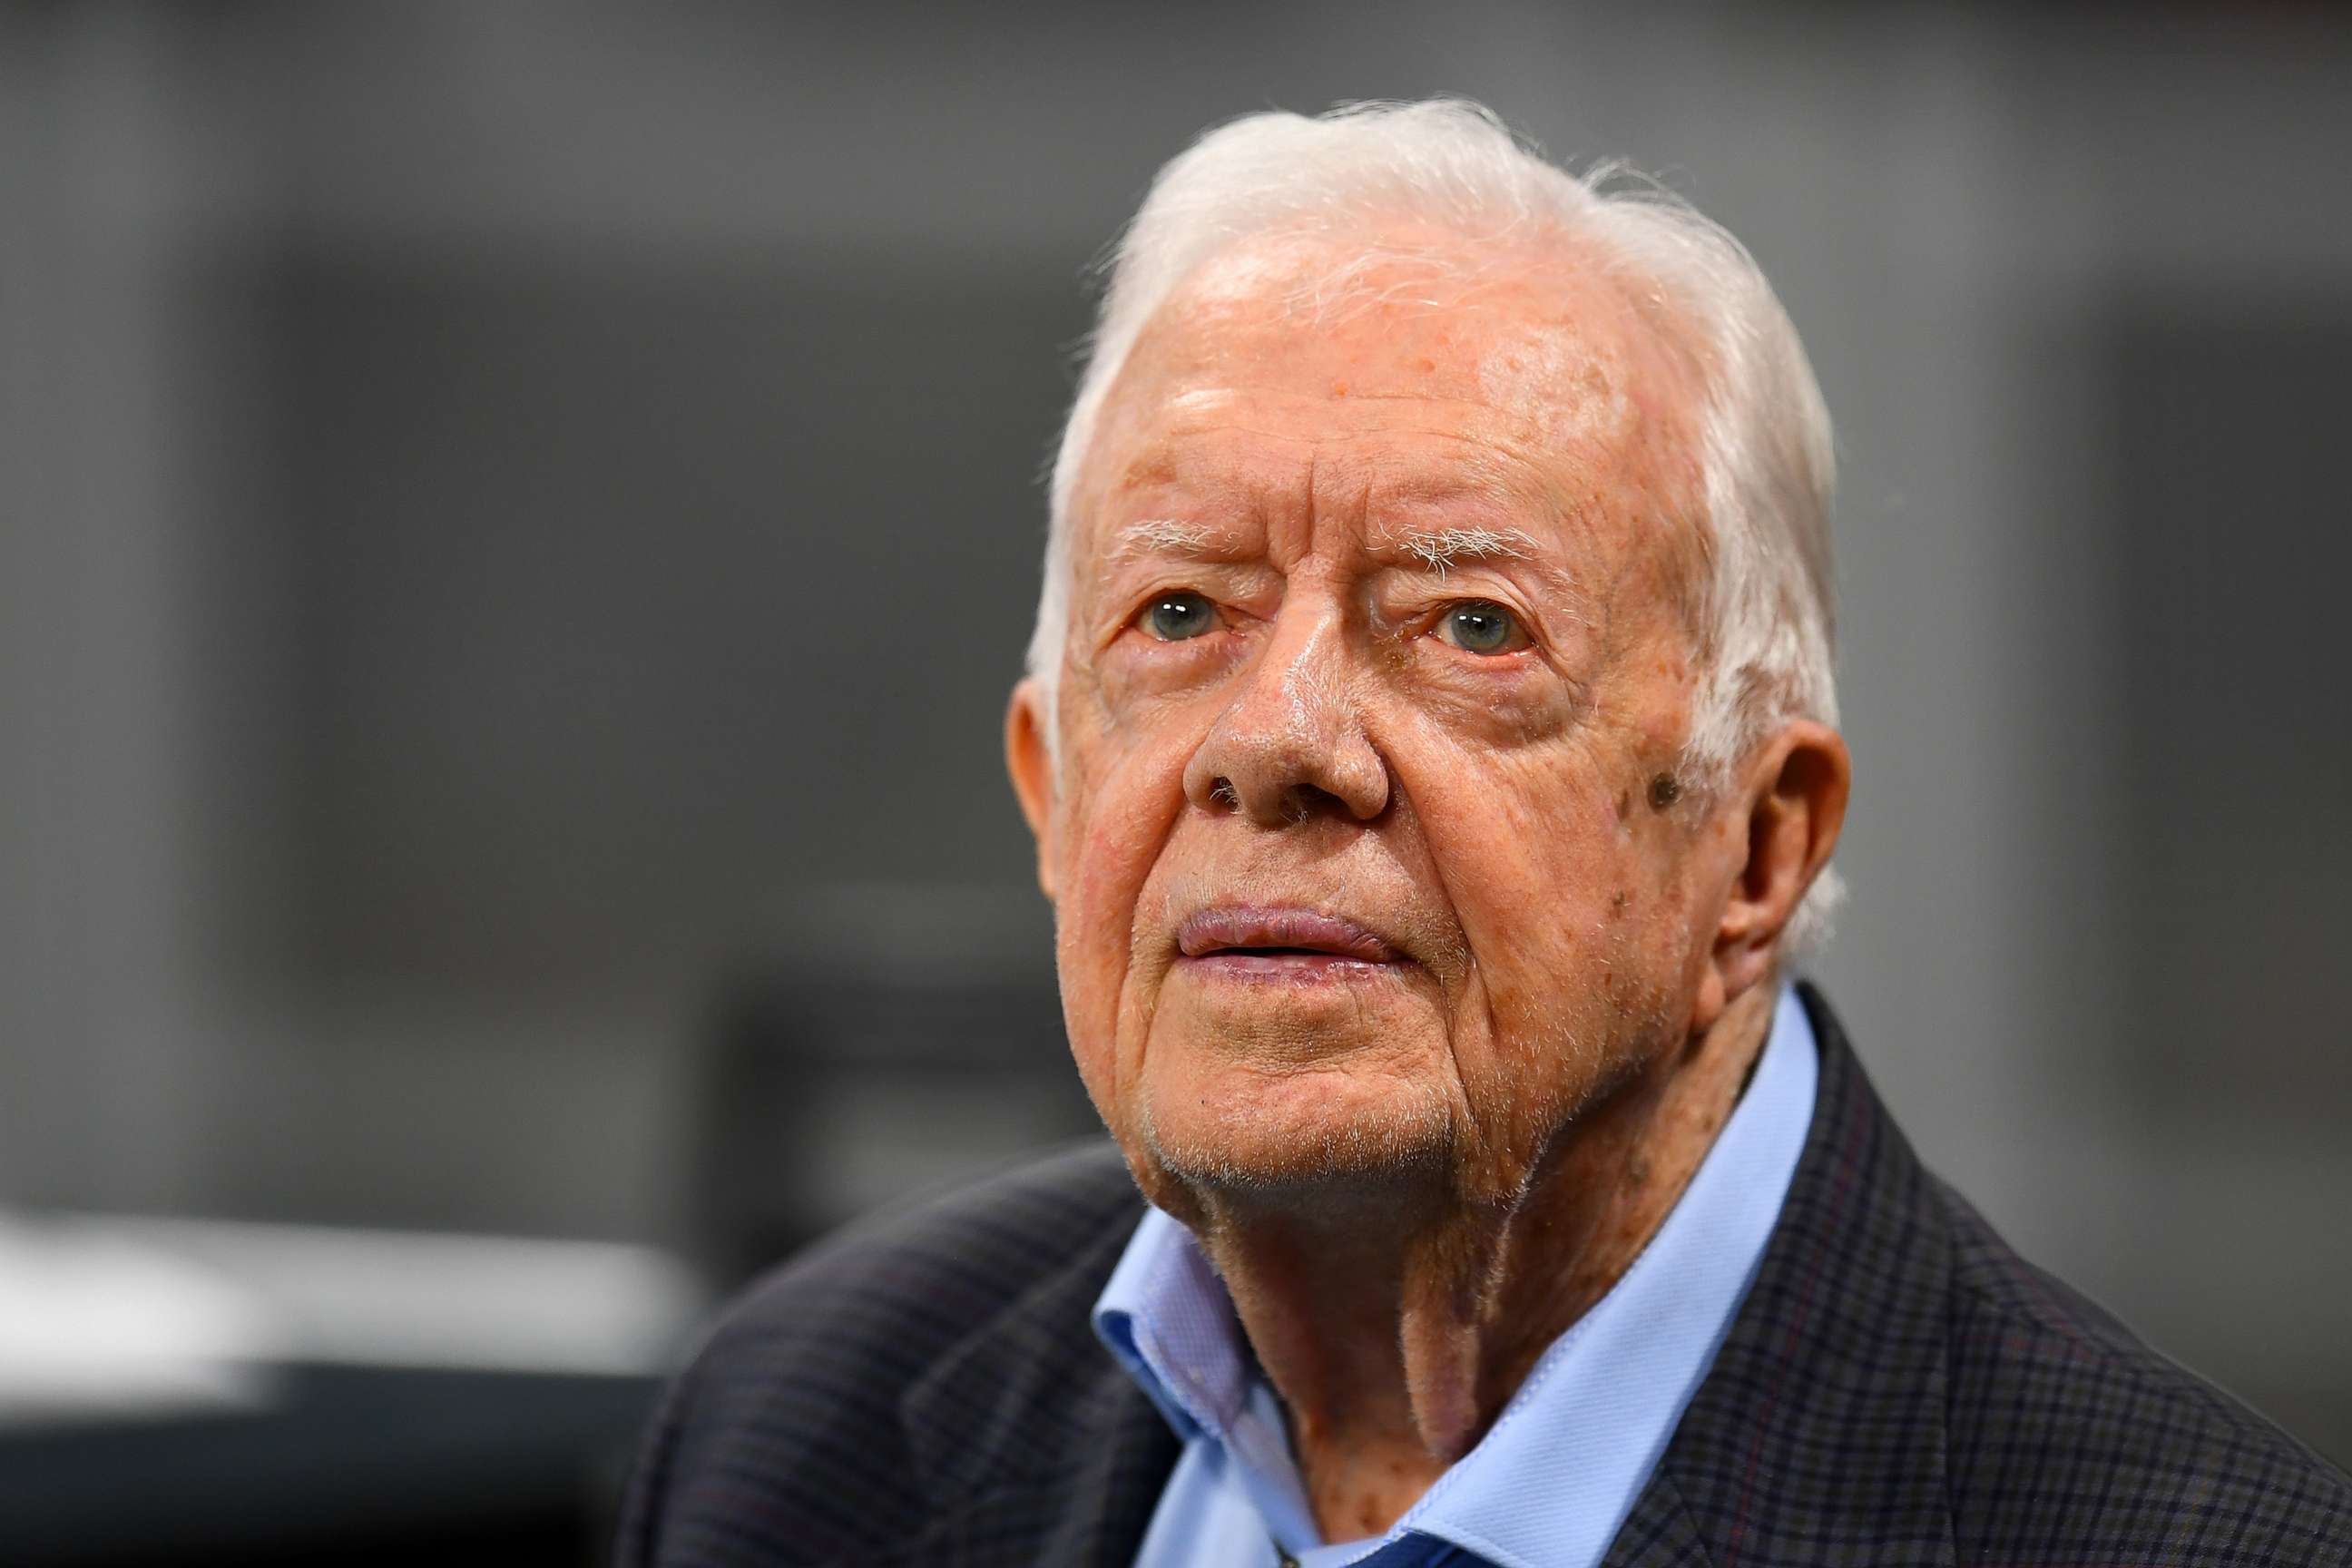 PHOTO: In this Sept. 30, 2018, file photo, former president Jimmy Carter attends an event in Atlanta.